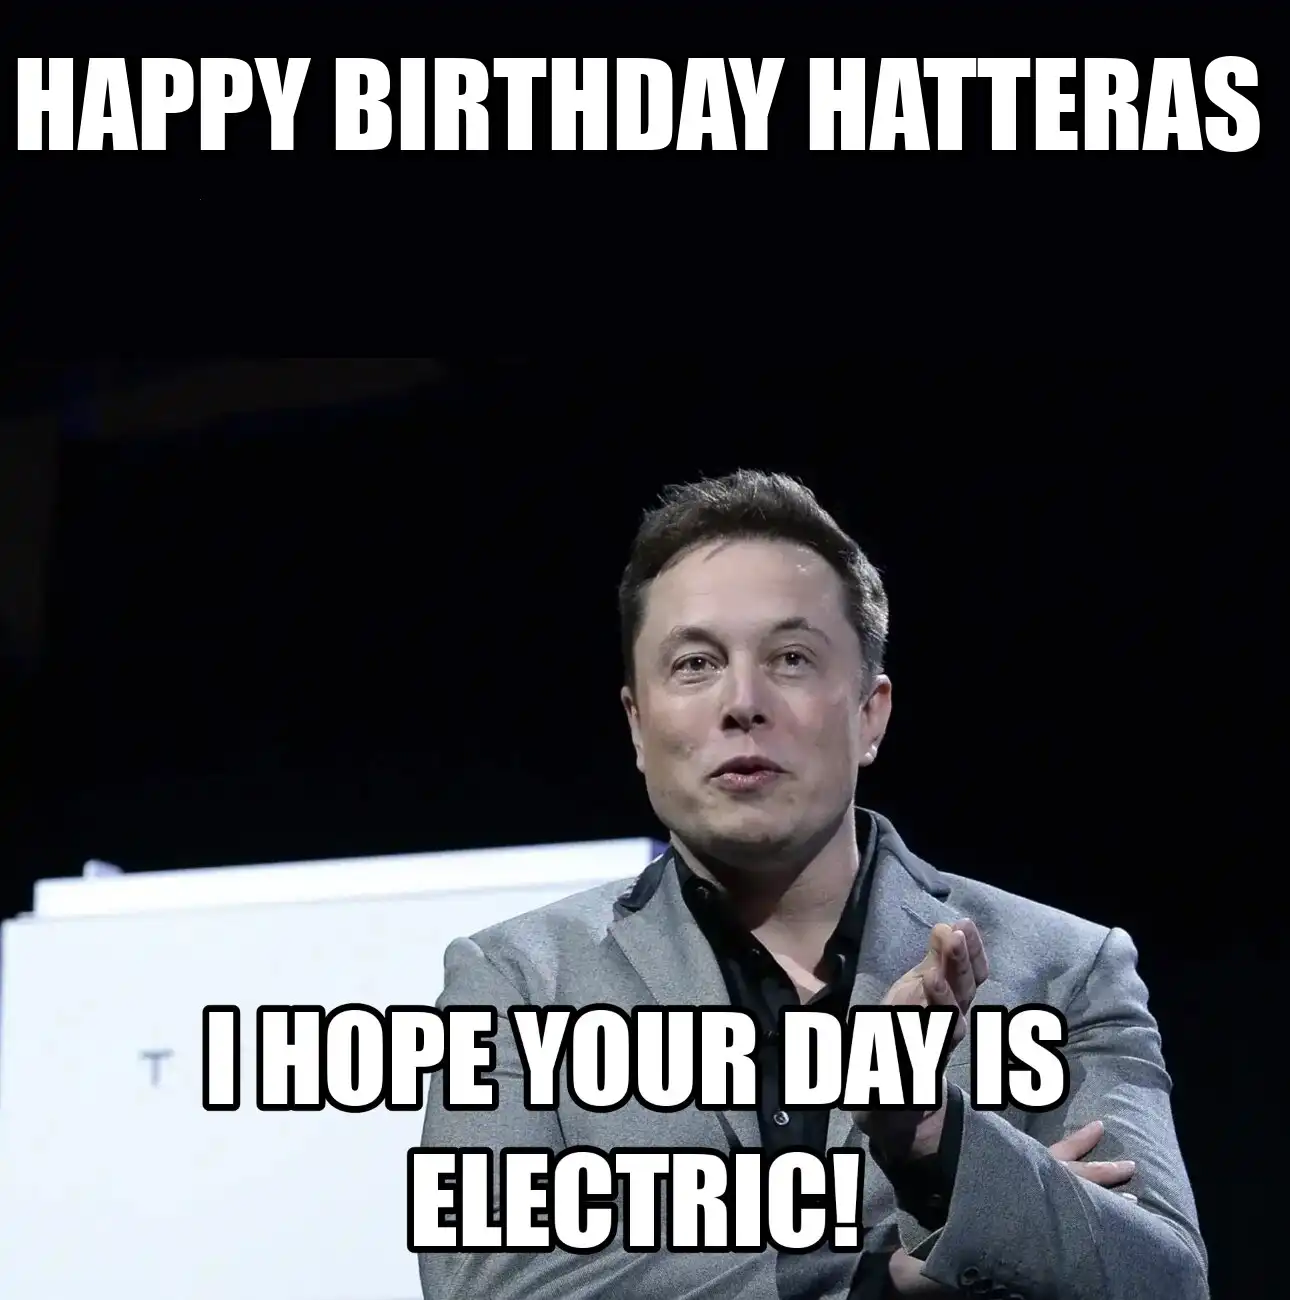 Happy Birthday Hatteras I Hope Your Day Is Electric Meme